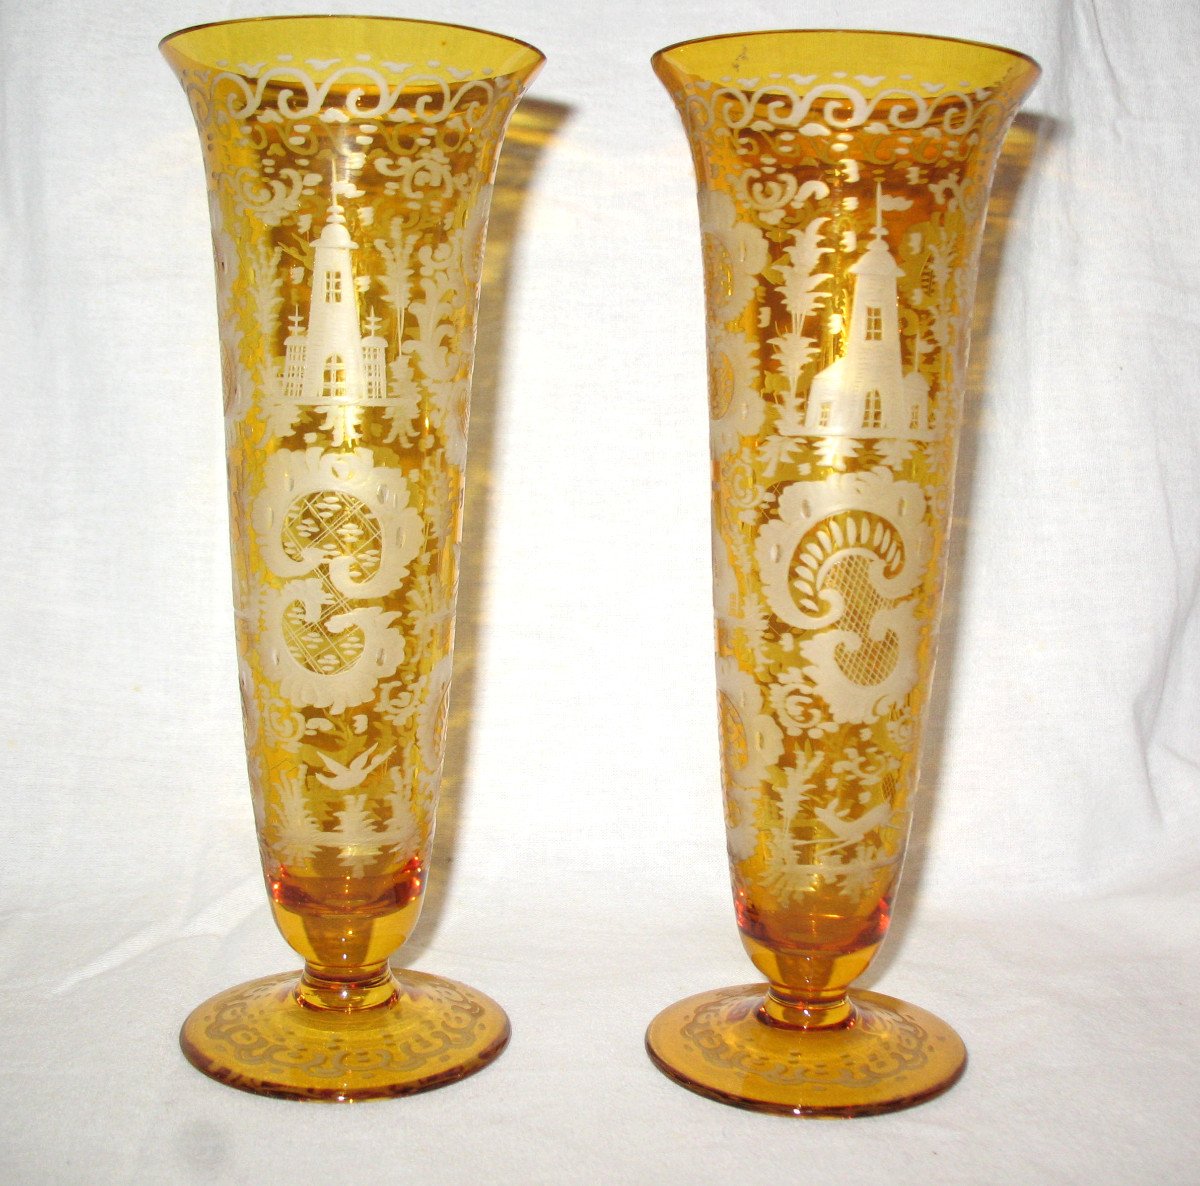 Pair Of Bohemian Amber Glass Vases With Engraved Decoration Of Animals And Castle, 19th Century